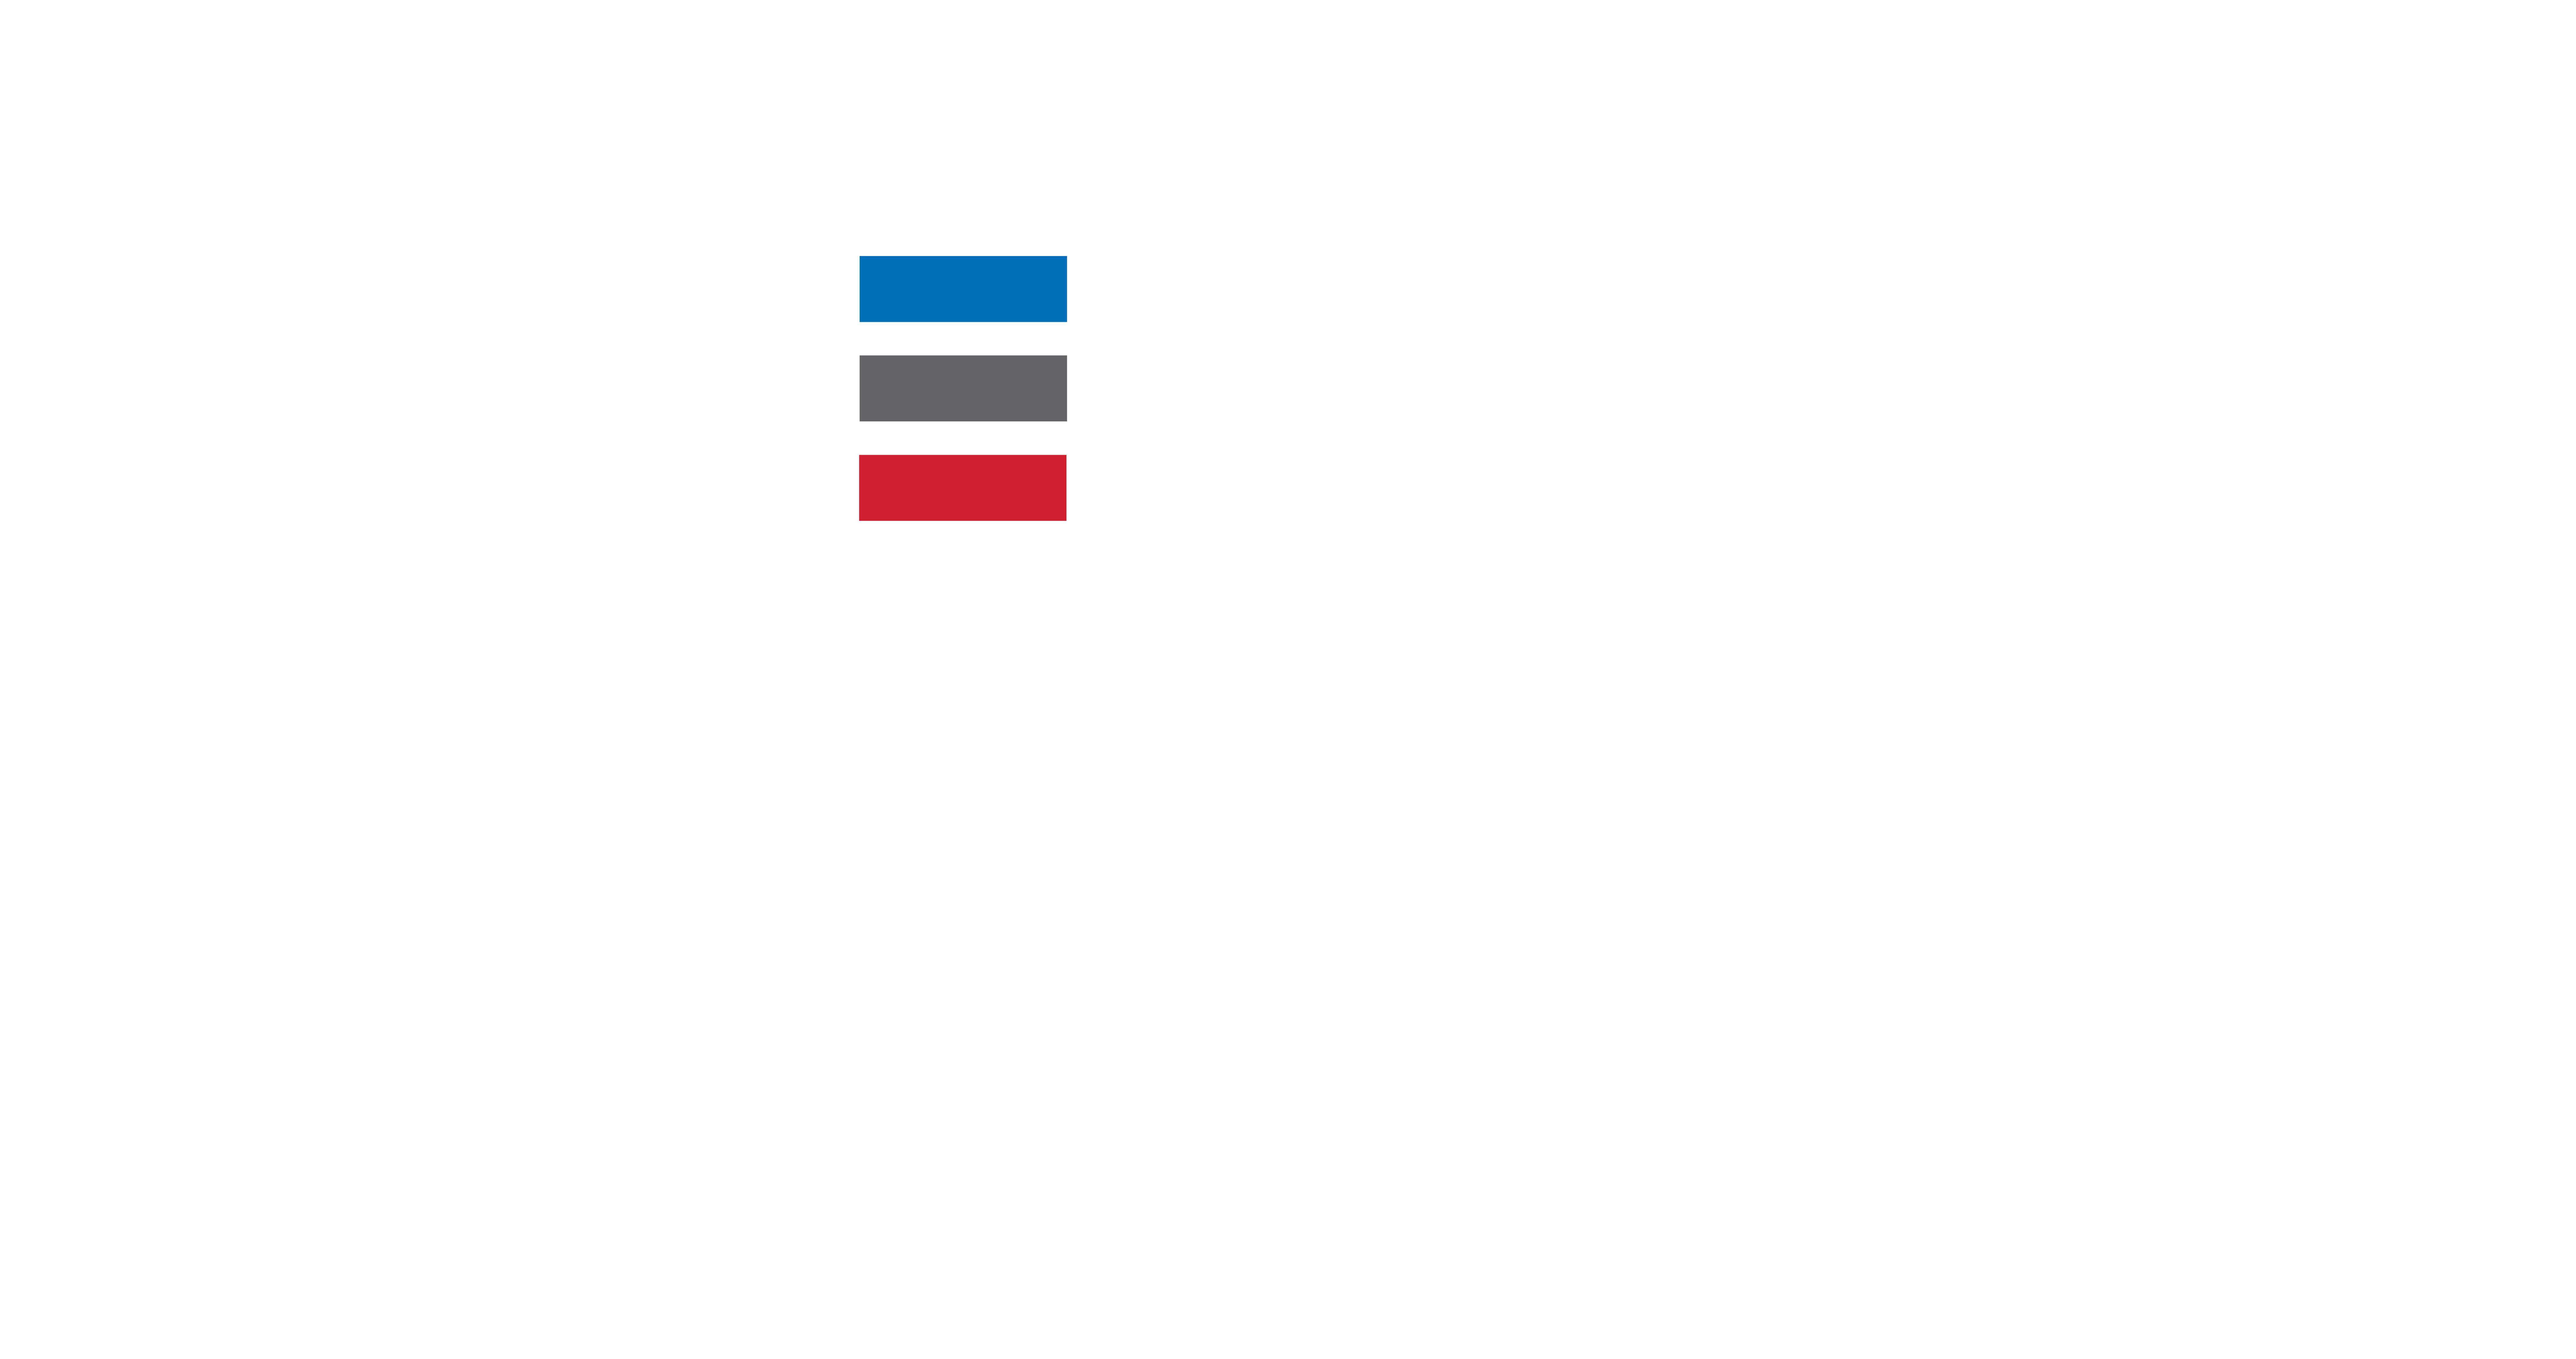 DELTCORP INDUSTRIES